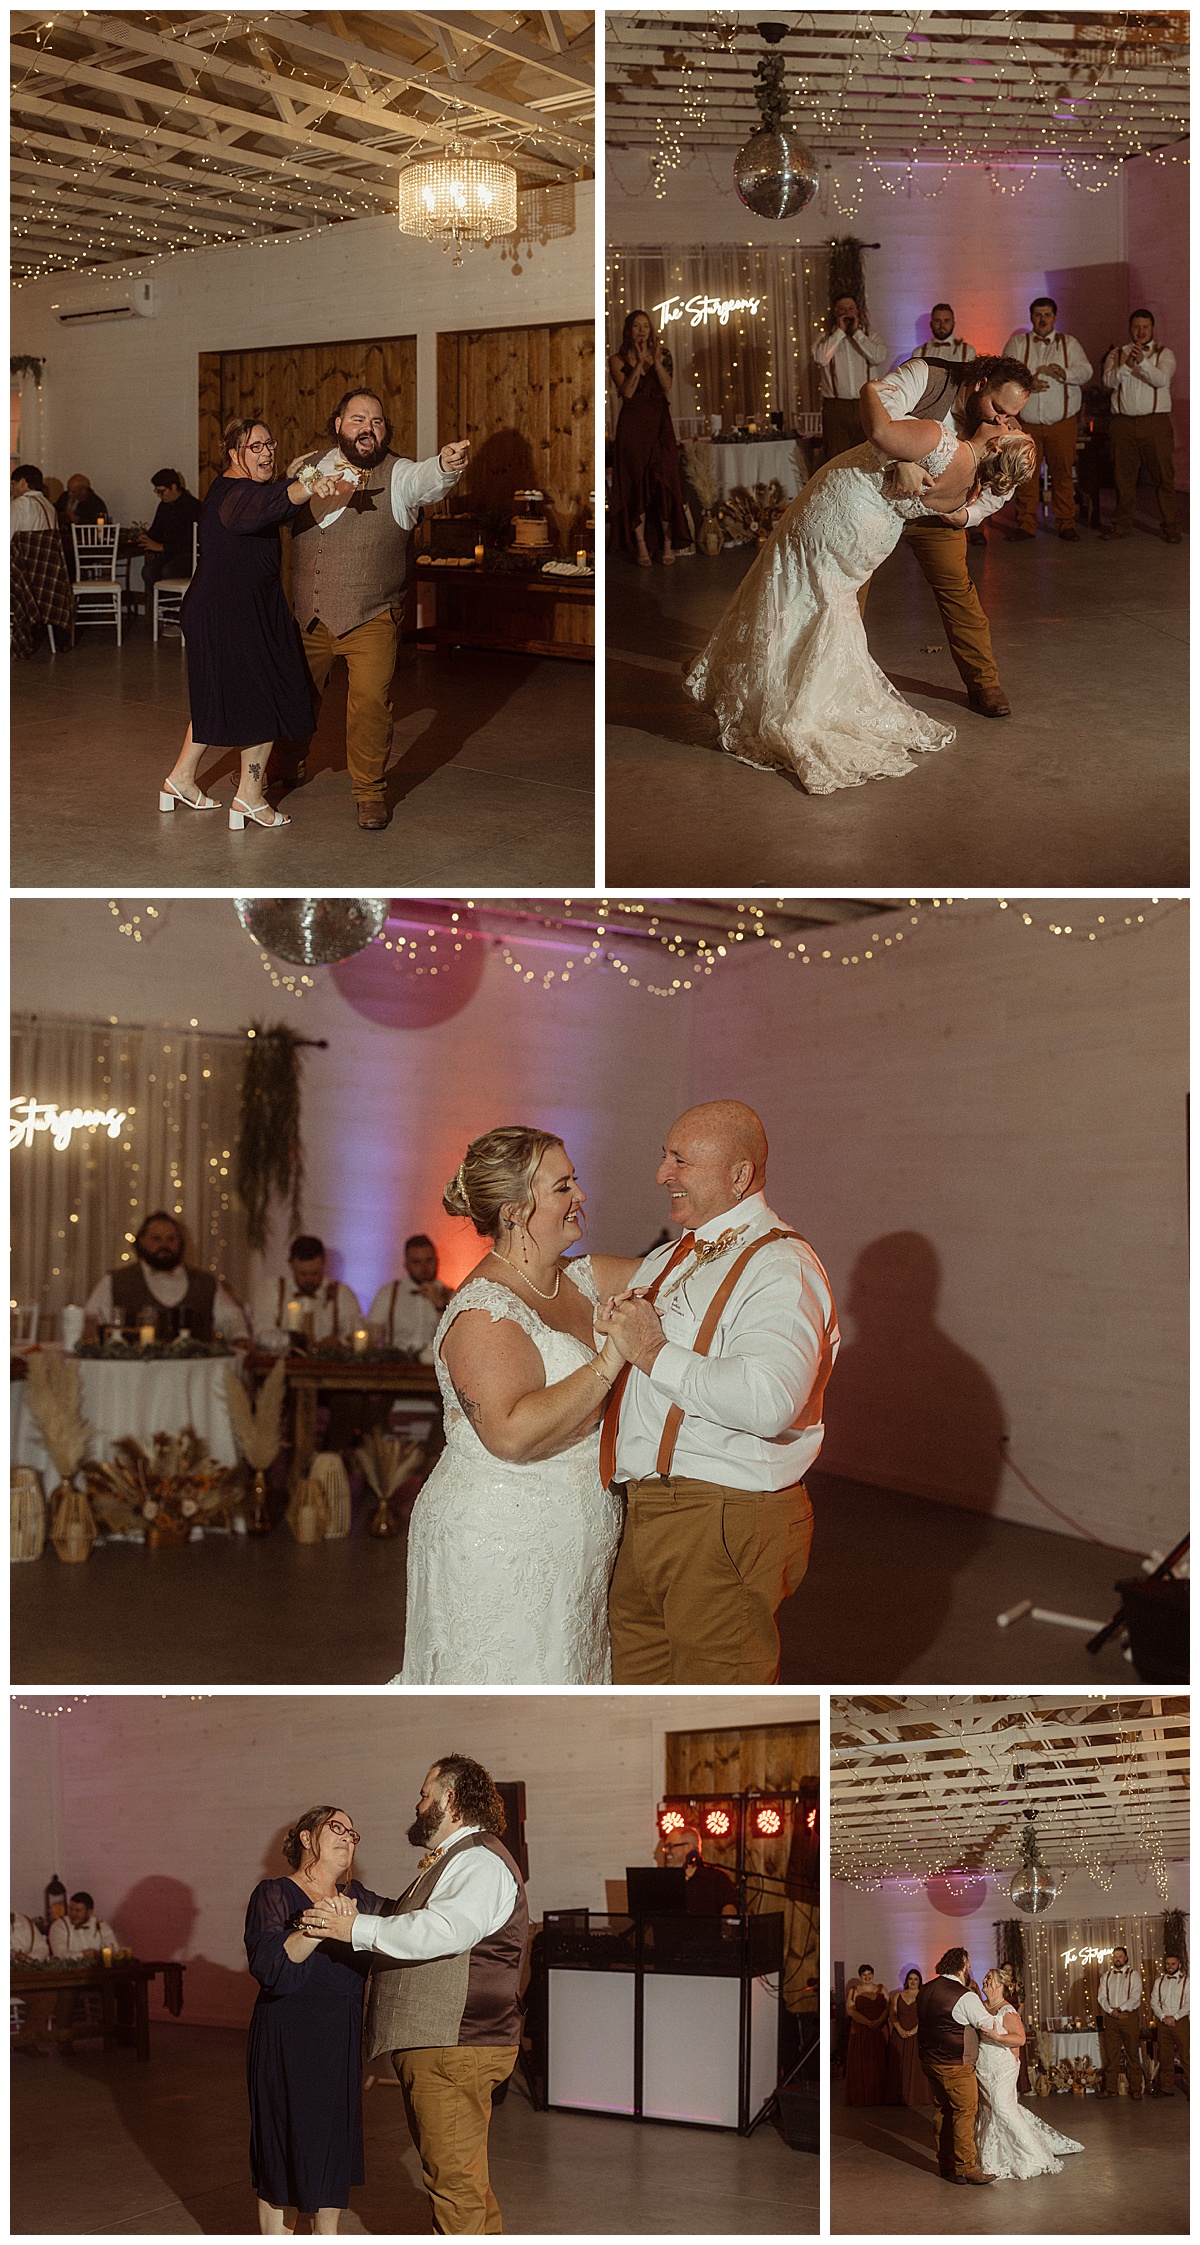 The bride and groom share a first dance after their wedding at The Barn at Higgins Lake.